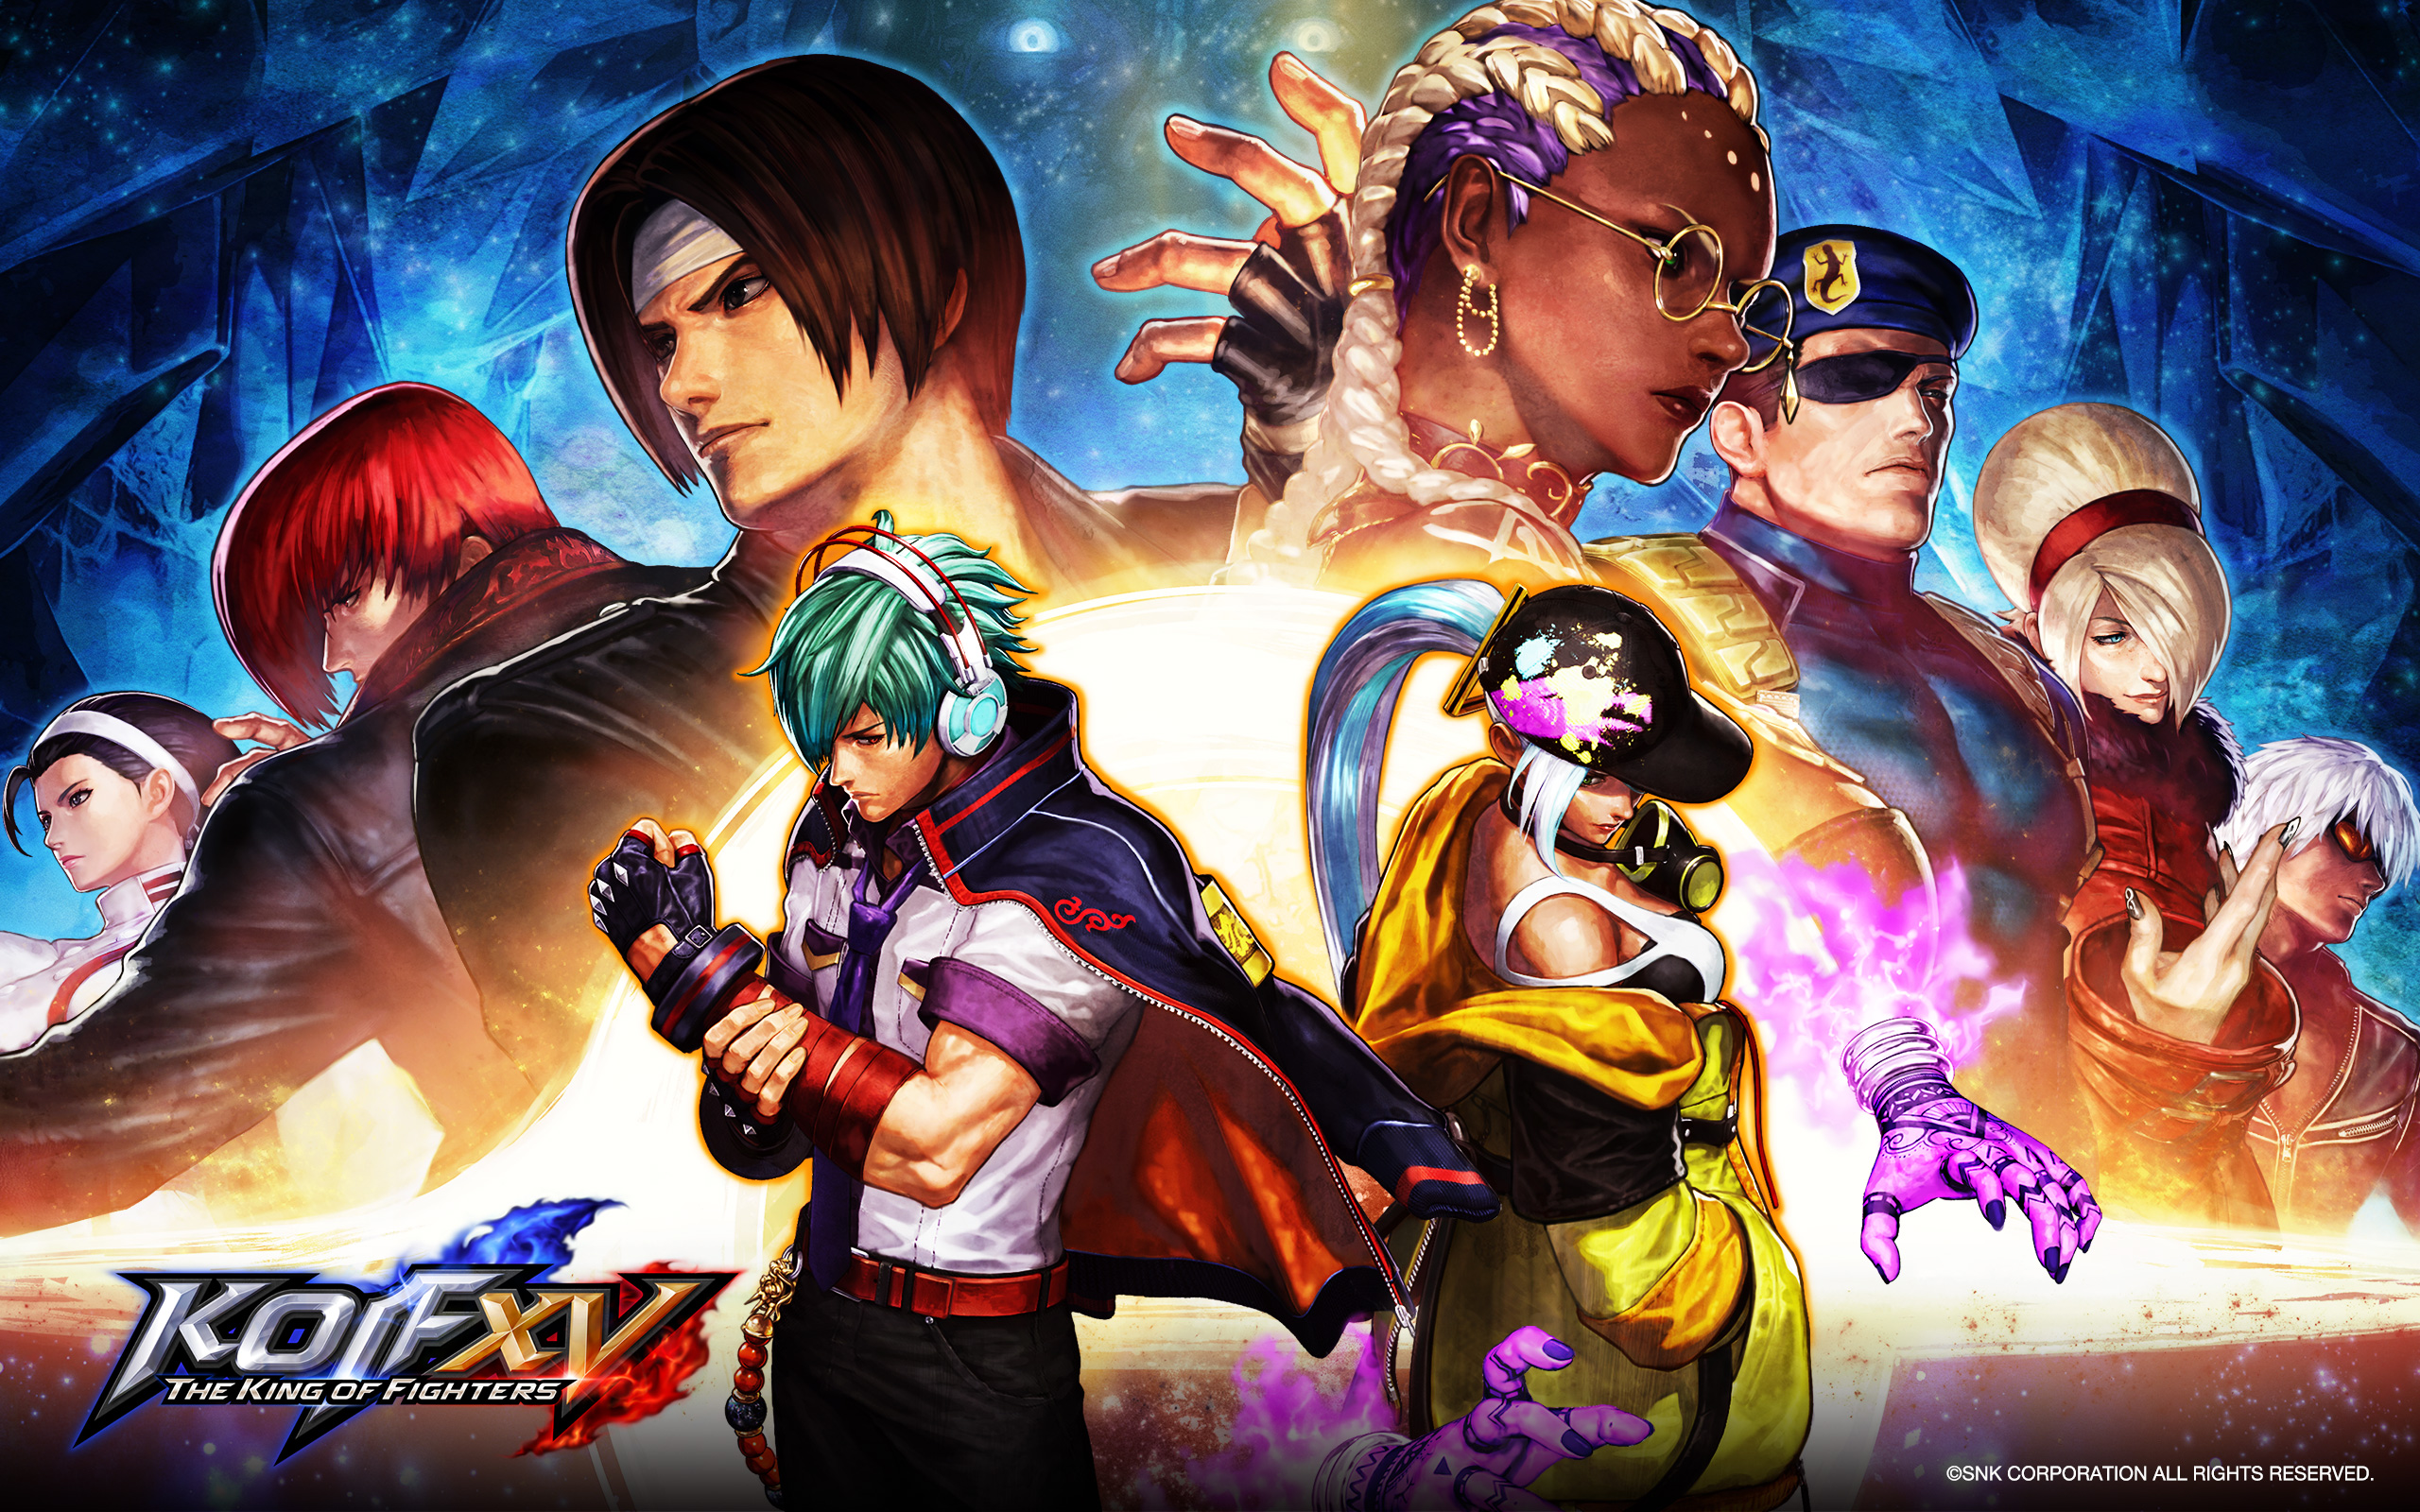 SPECIAL. THE KING OF FIGHTERS XV